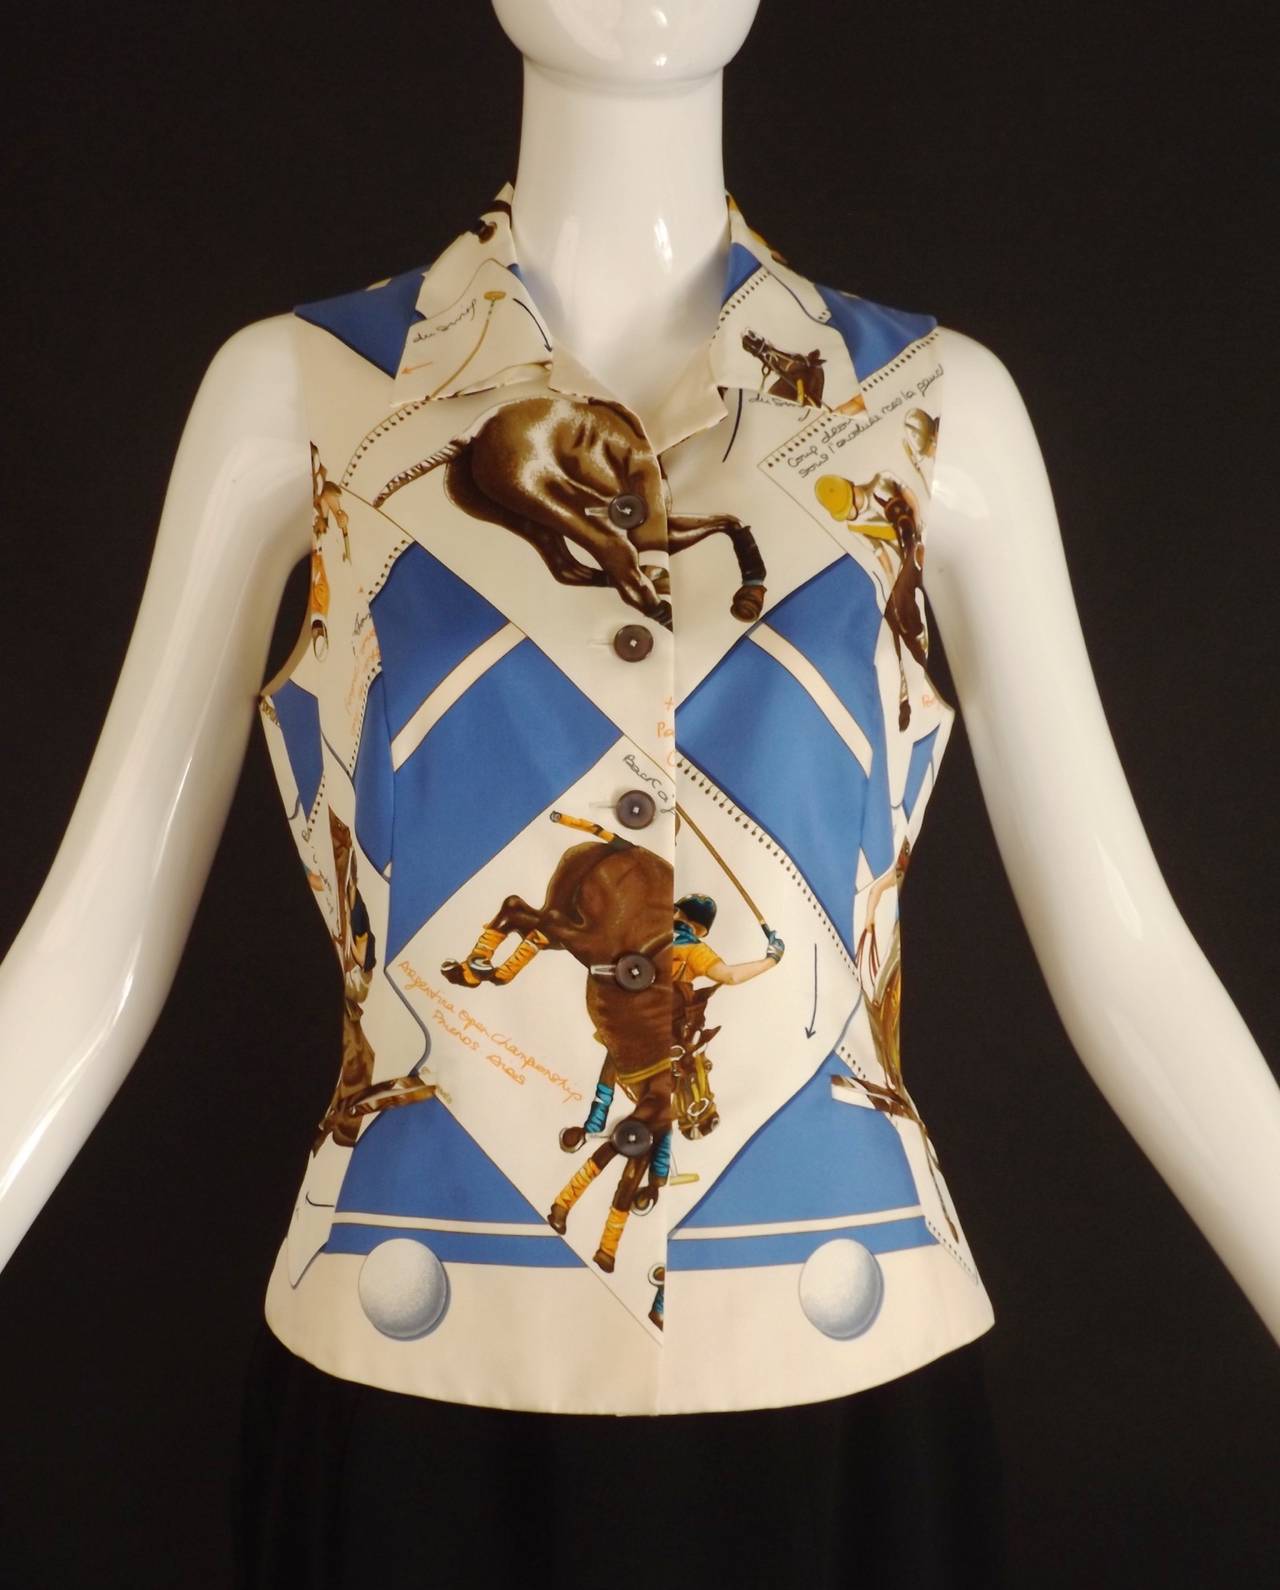 Fabulous silk twill blouse with a polo championship print. The blouse in white with a blue, orange and brown pattern. The blouse has a spread collar and button closures down the front.  Princess seamed though the body with decorative notched pockets